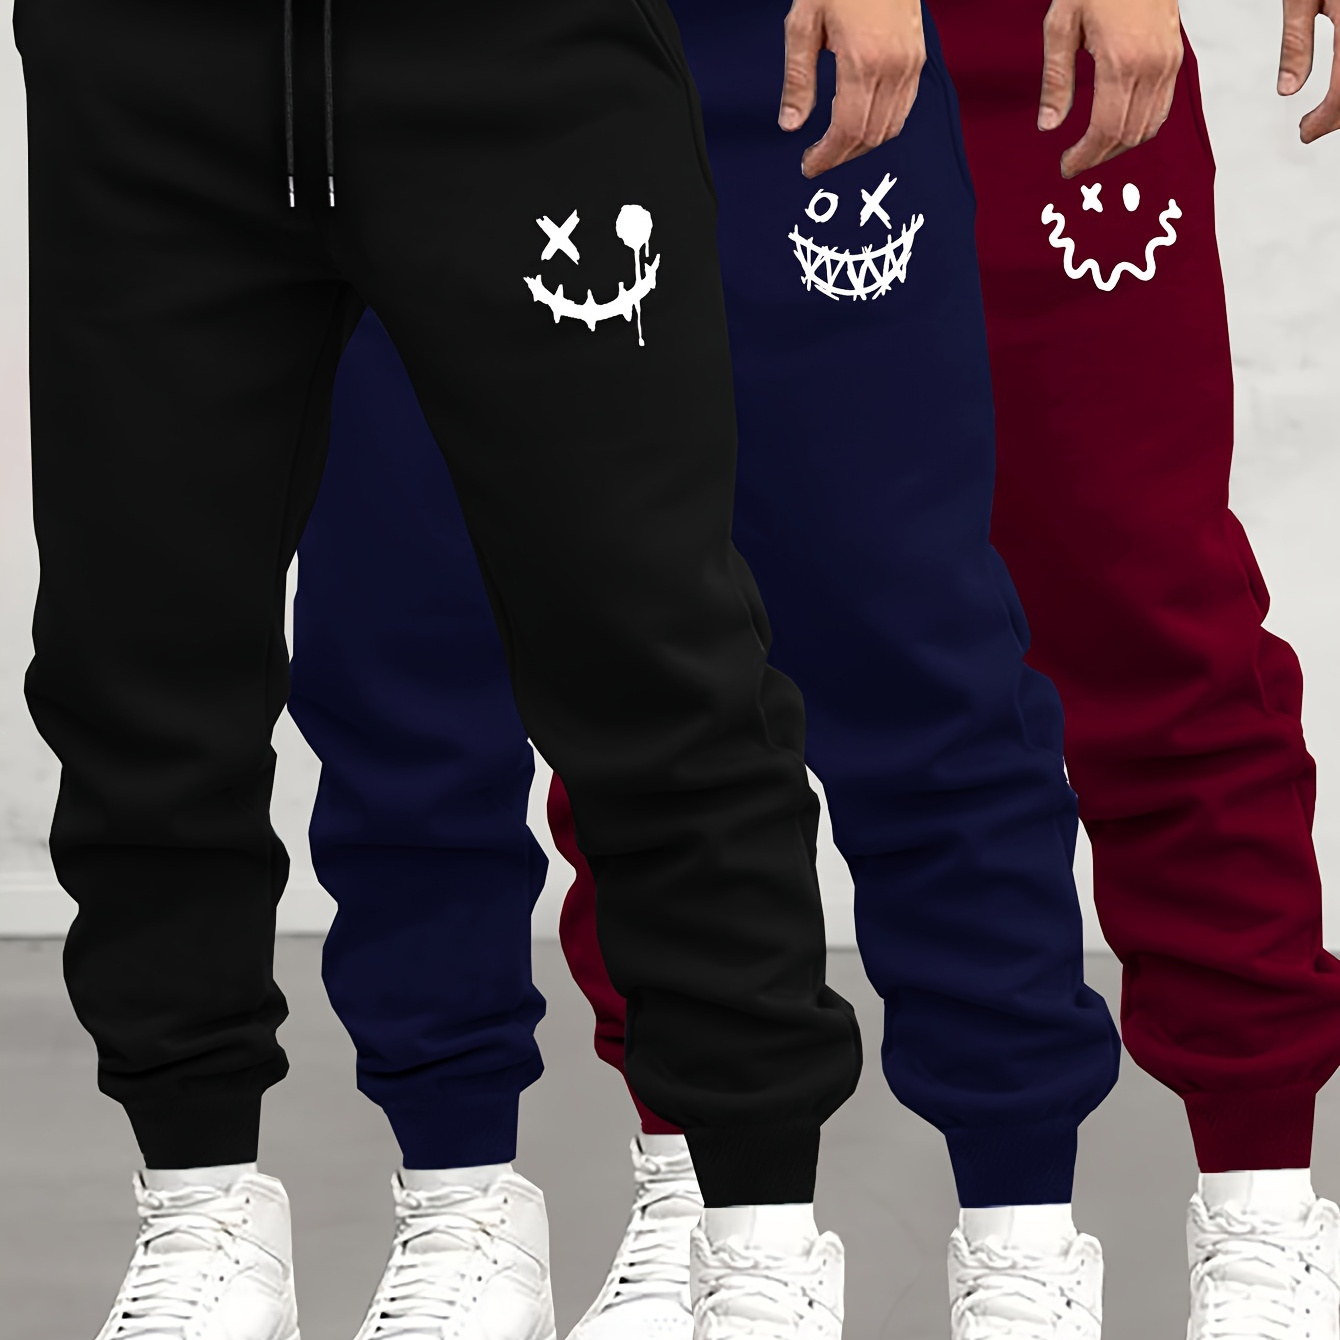 

Stylish Smiling Face Print 3pcs Men's Casual Jogger Sweatpants, Soft Autumn Winter Athletic Track Pants, Comfortable Outdoor Cuffed Drawstring Pants For Sports Outdoor Activities